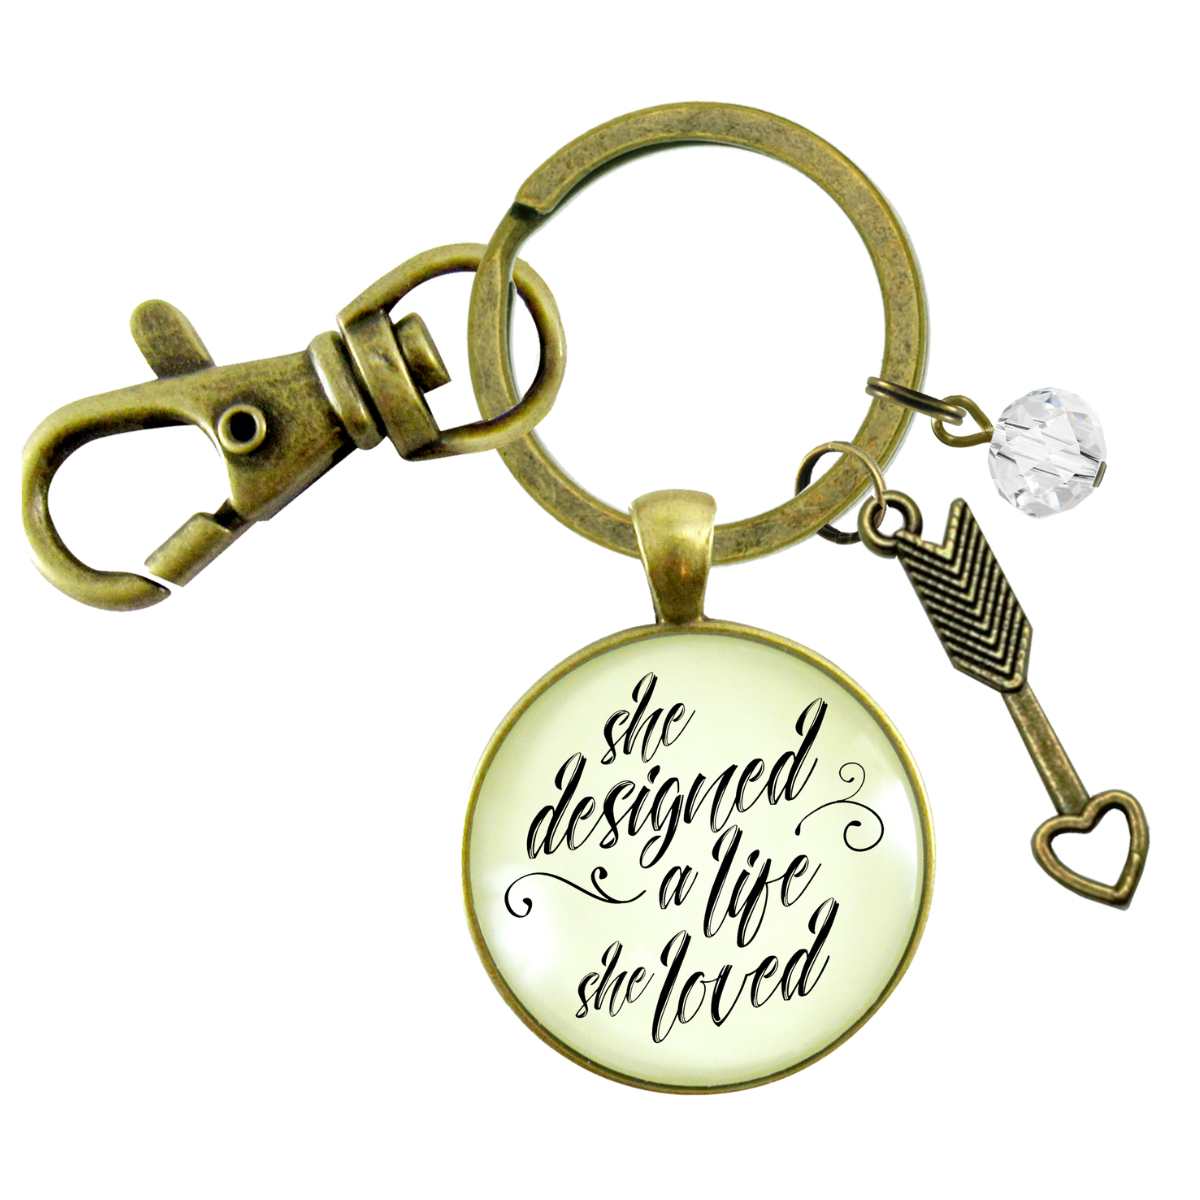 She Designed a Life She Loved Keychain Glam Quote Women Of Purpose Jewelry Brave Arrow  Keychain - Women - Gutsy Goodness Handmade Jewelry